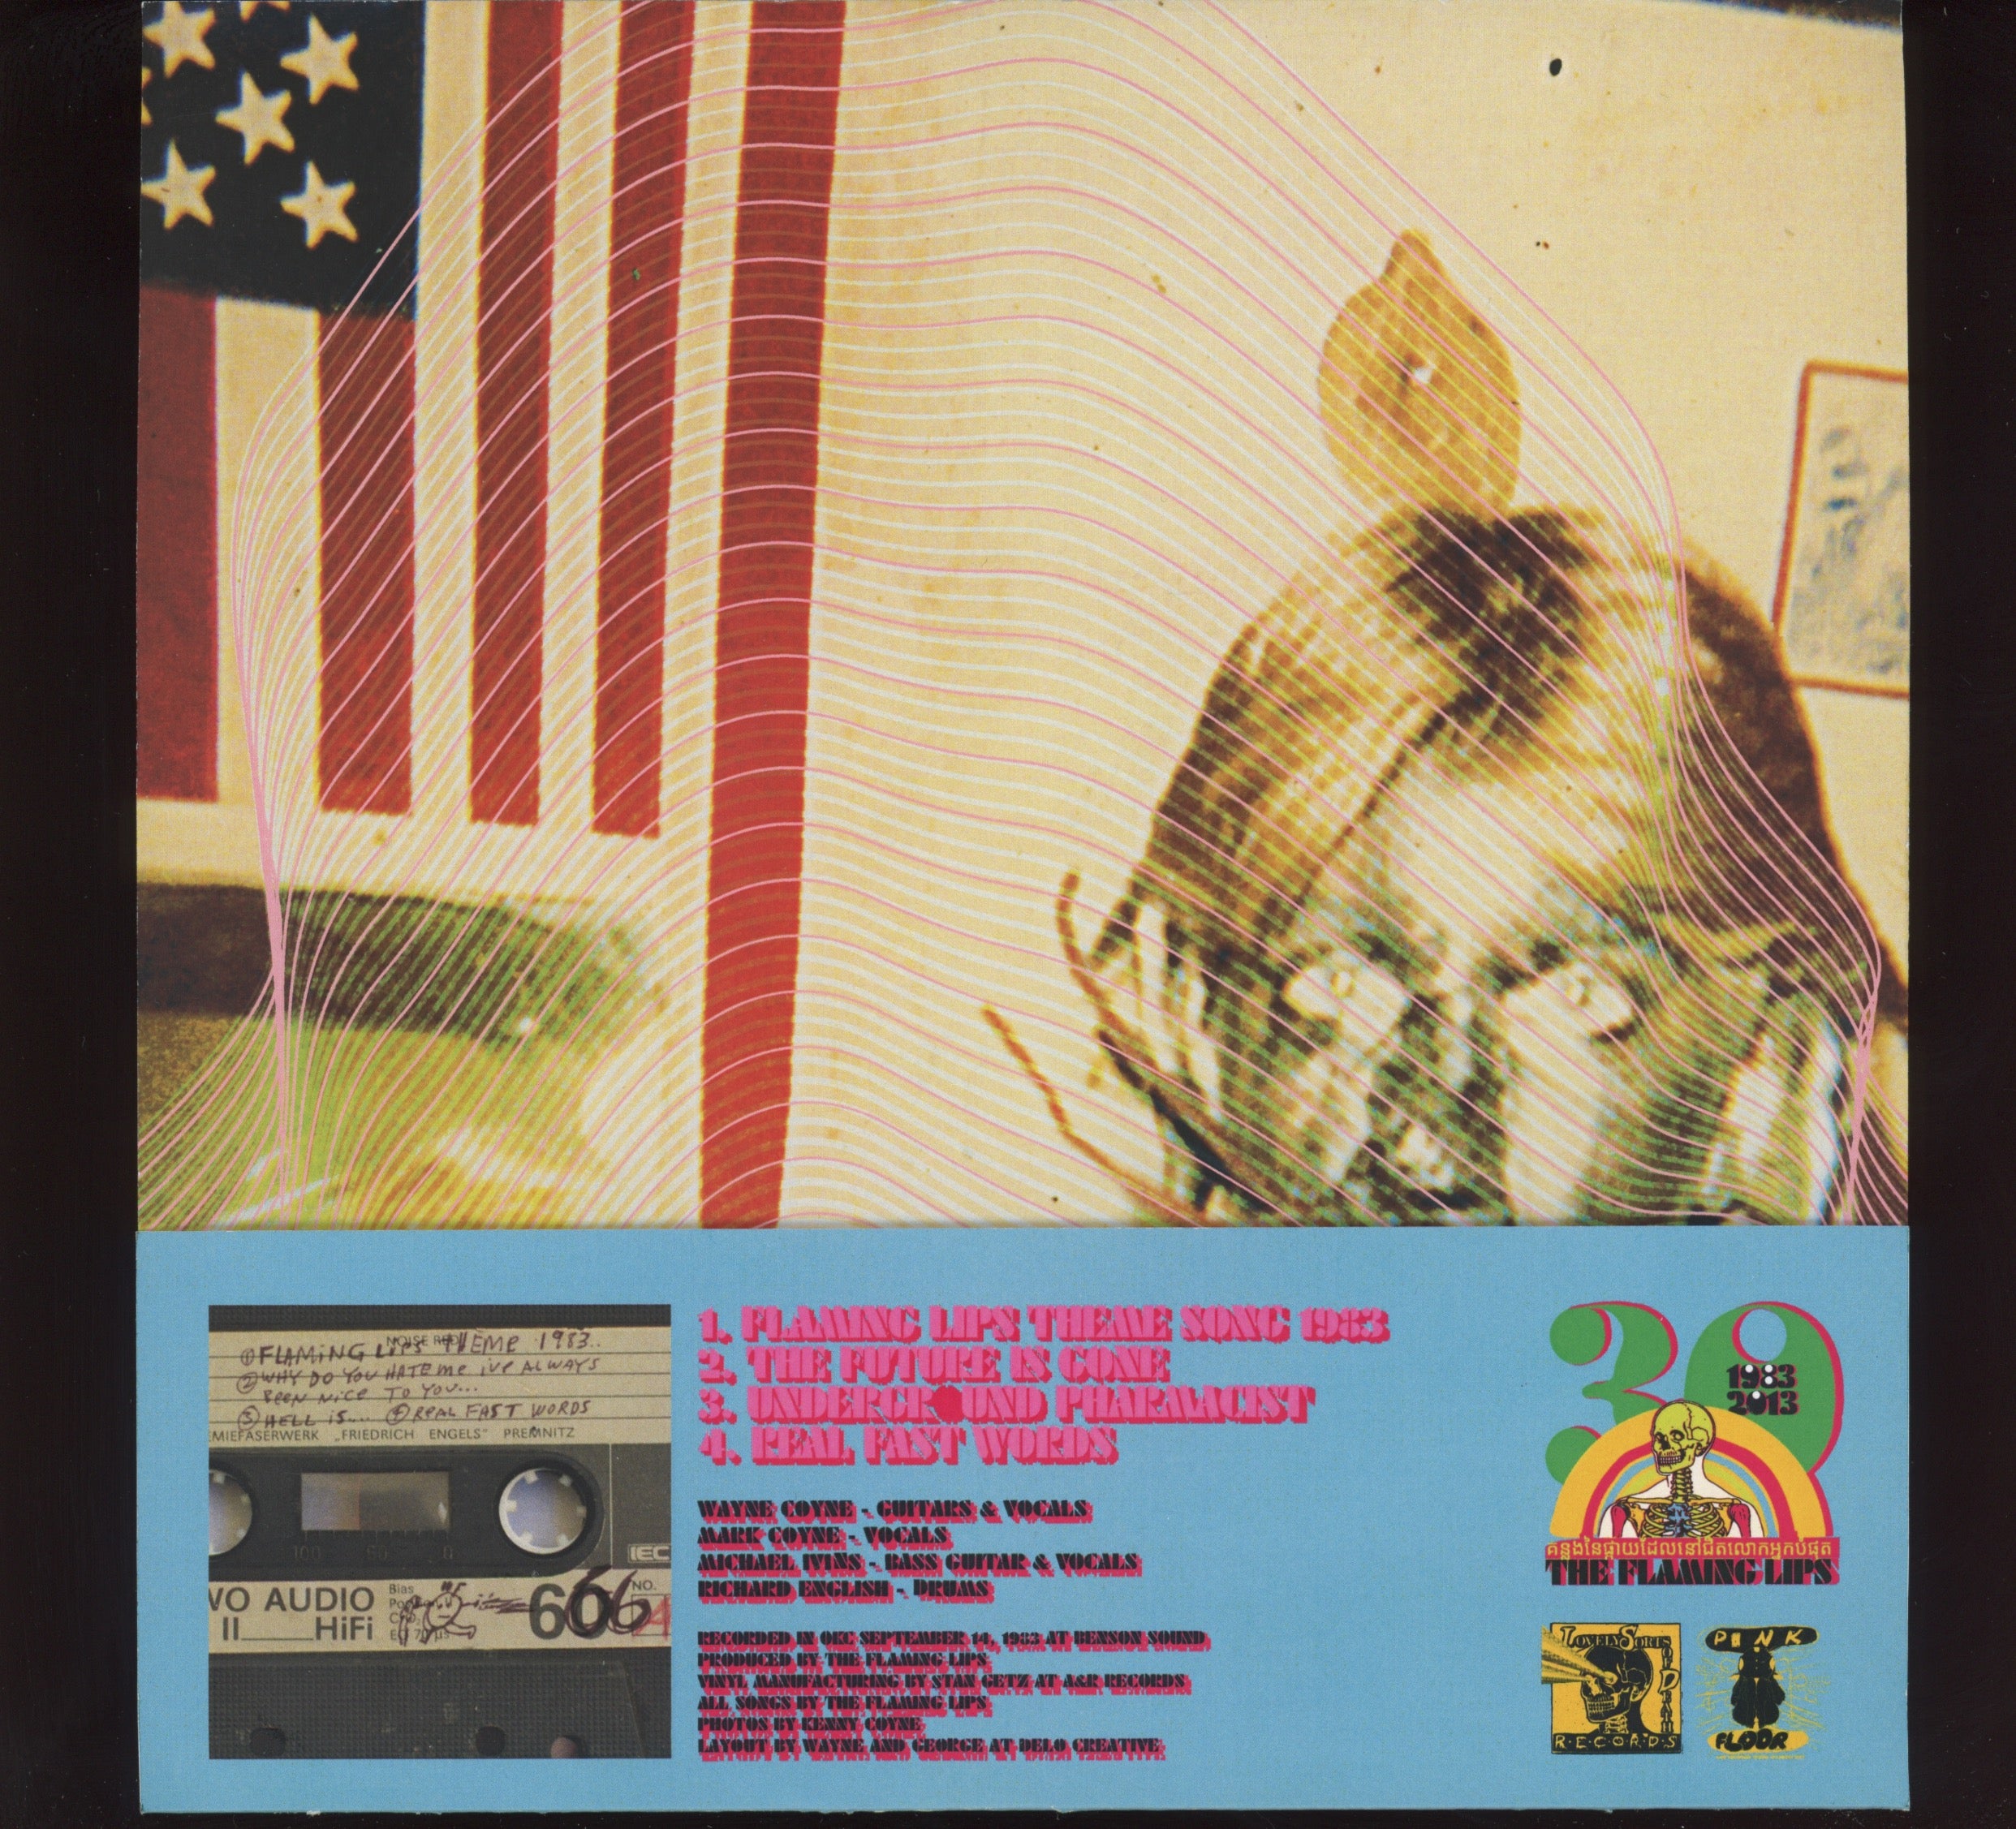 The Flaming Lips - 2nd Cassette Demo on Lovely Sorts of Death Ltd Blue Vinyl 7" With Pic Sleeve